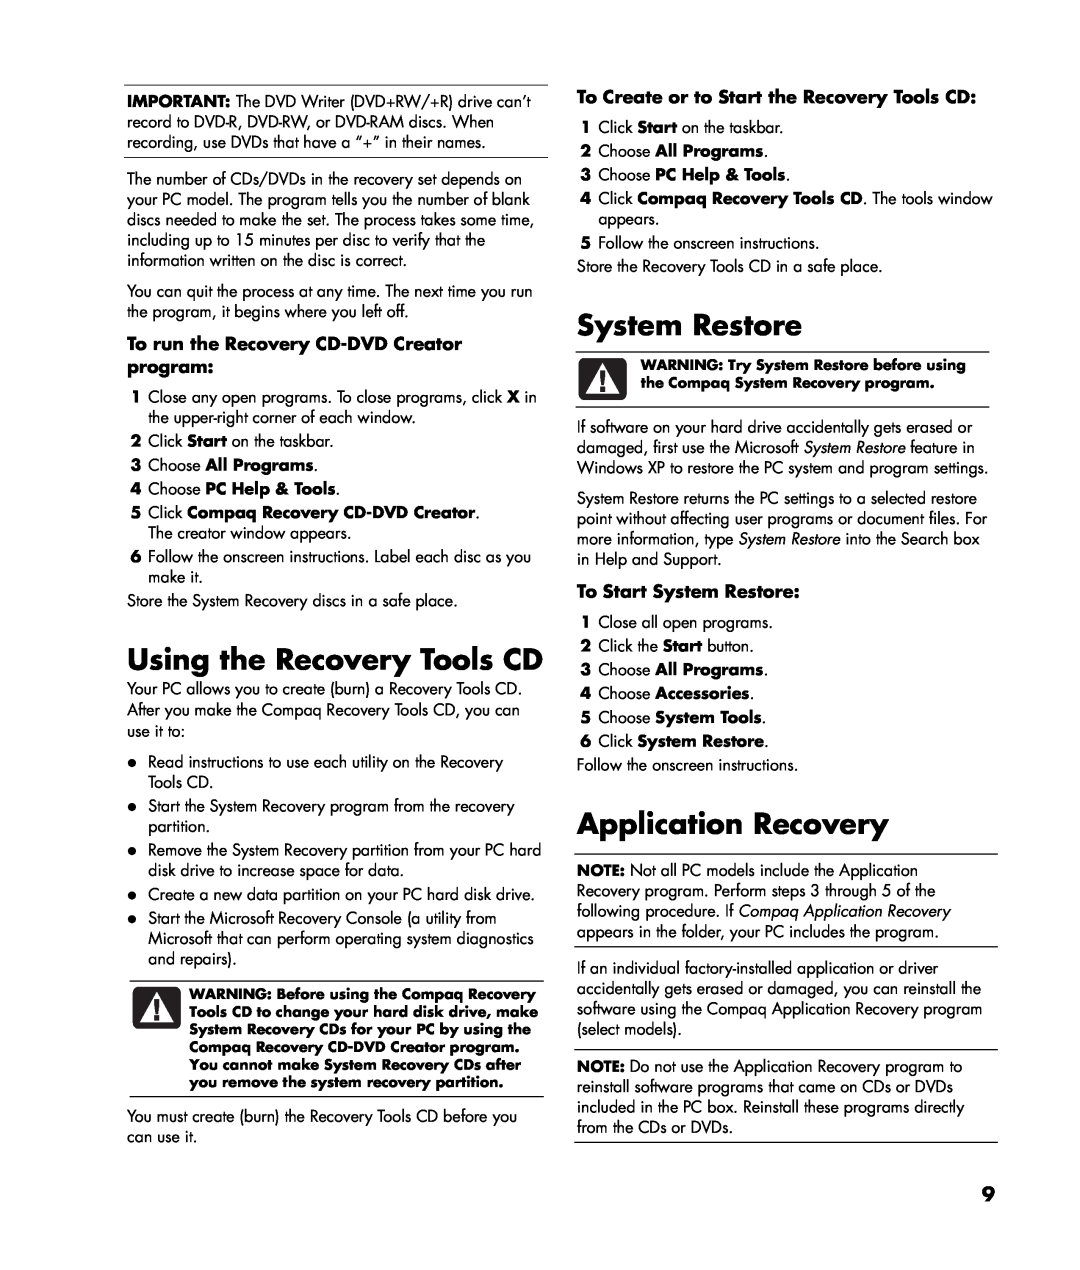 HP SR1130NX Using the Recovery Tools CD, System Restore, Application Recovery, To run the Recovery CD-DVD Creator program 